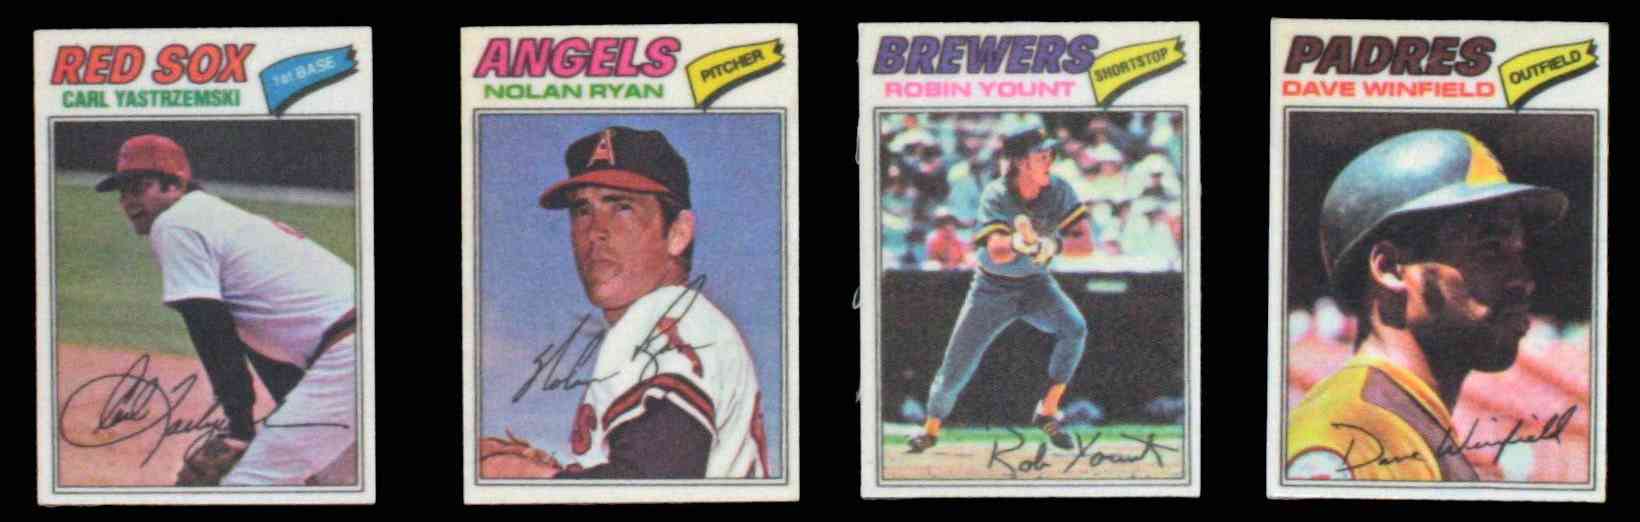 1977 Topps Cloth Stickers #54 Robin Yount [* VAR:] (Brewers) Baseball cards value